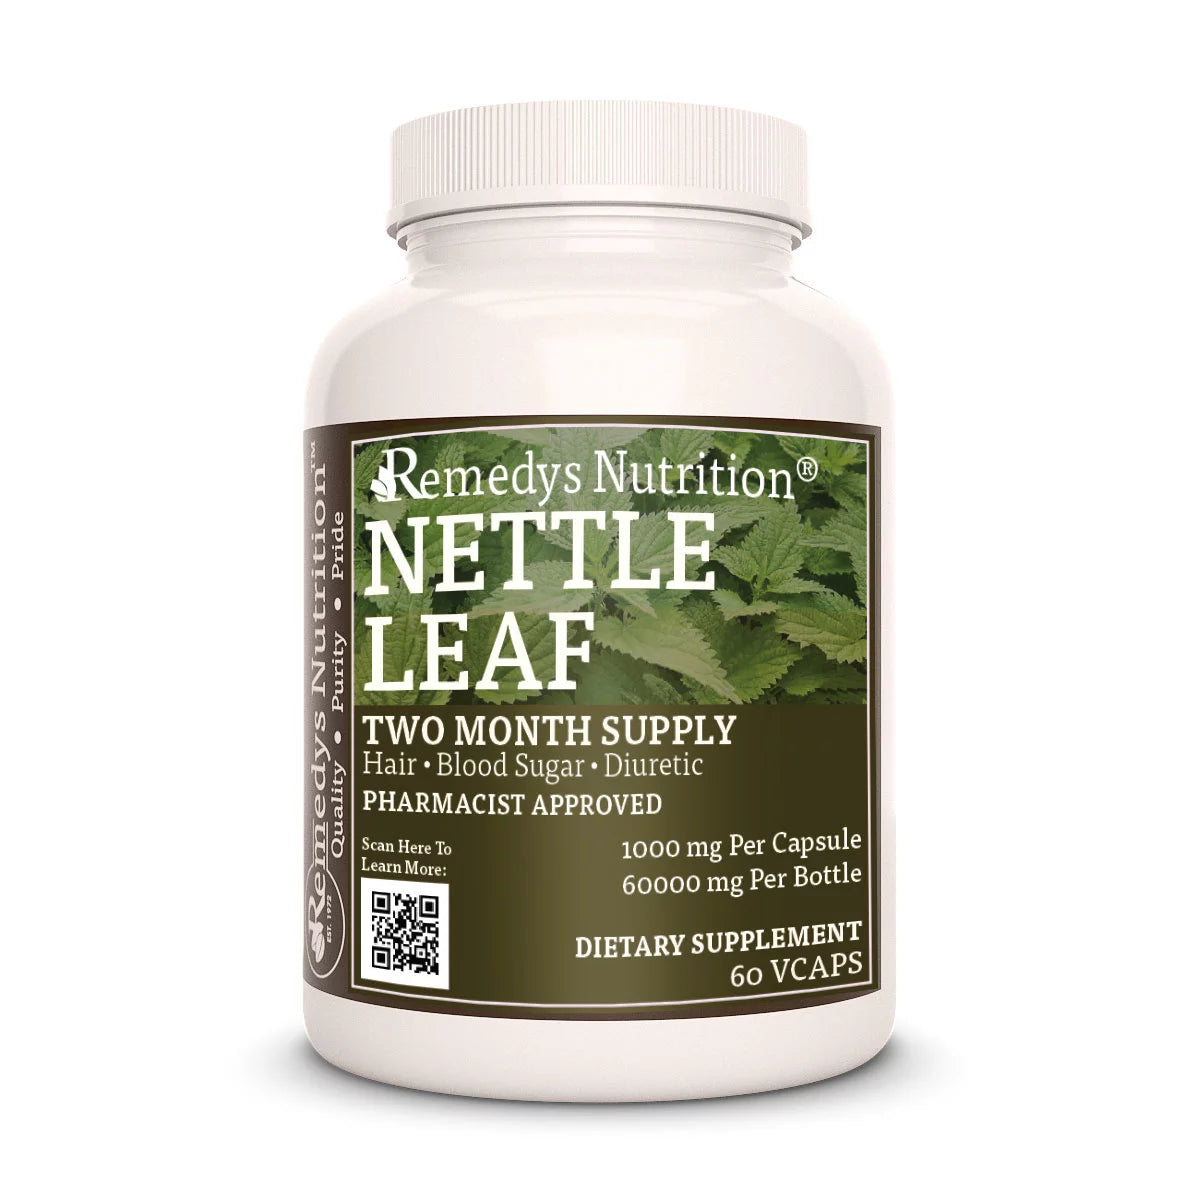 Image of Remedy's Nutrition® Nettle Leaf Capsules Herbal Dietary Supplement front bottle. Made in the USA. Urtica dioica.